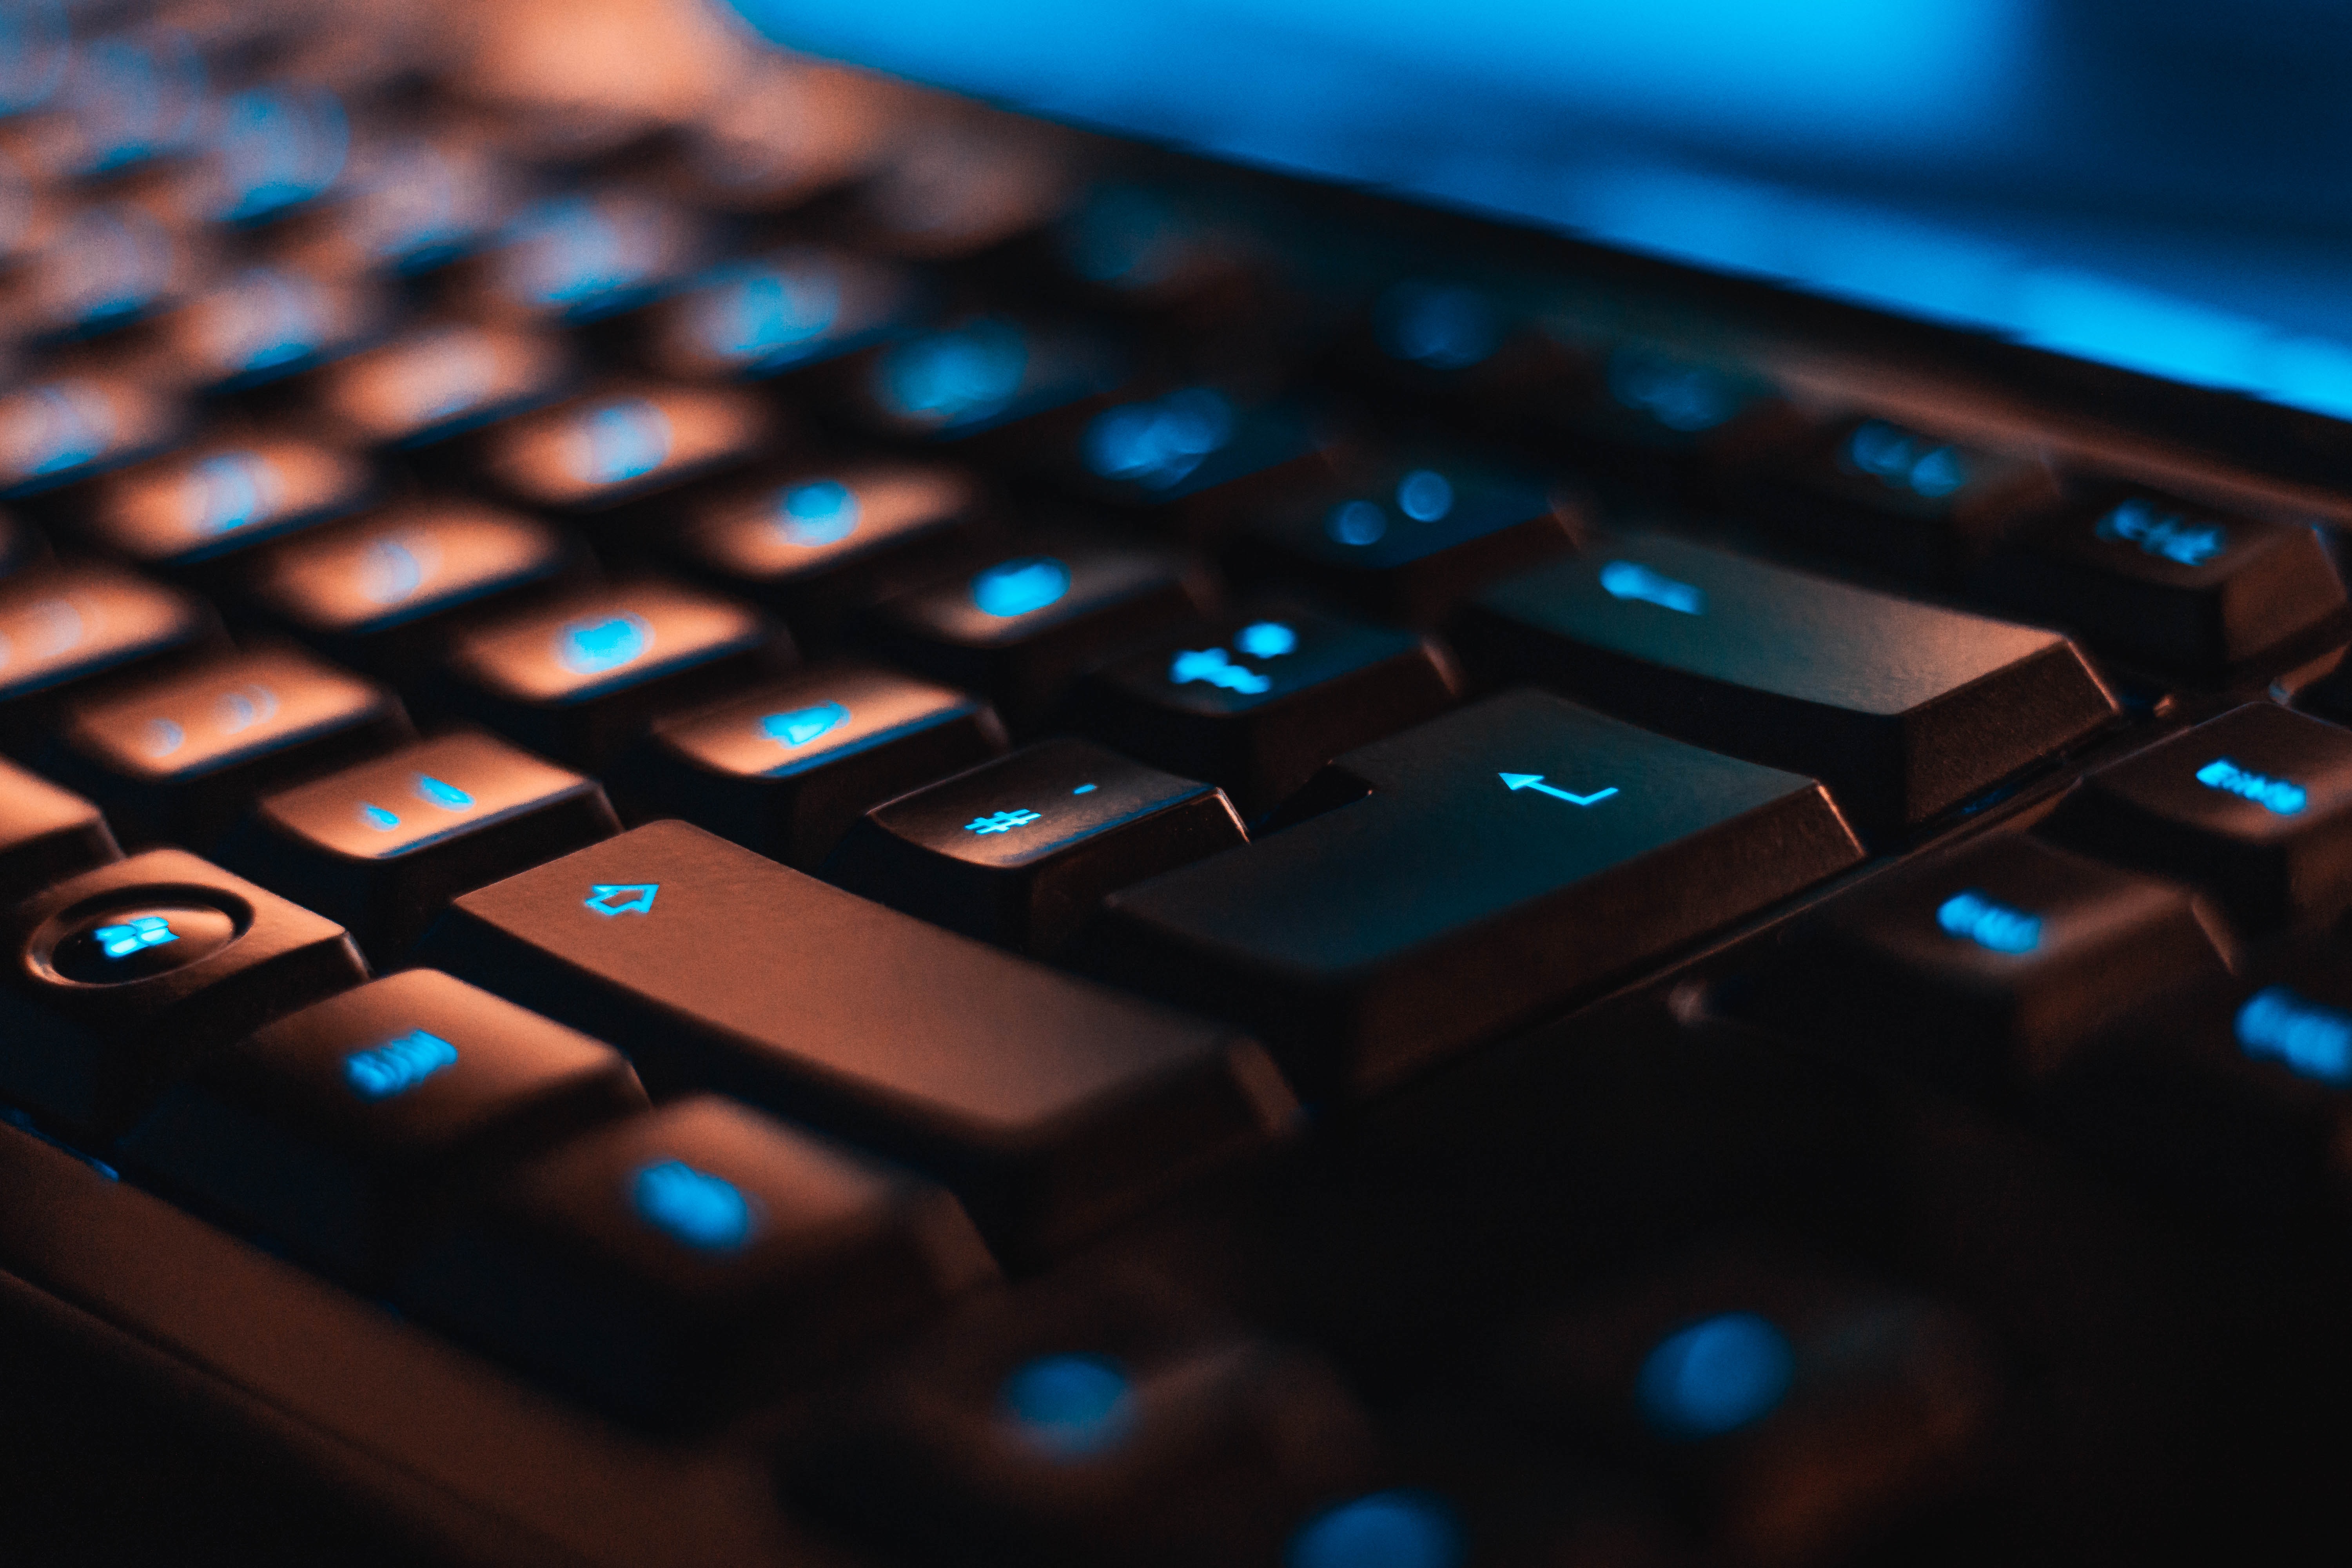 A close-up of a blue backlit keyboard with only a few keys in focus. Just above the top keys is the bottom part of the blue-lit computer screen.